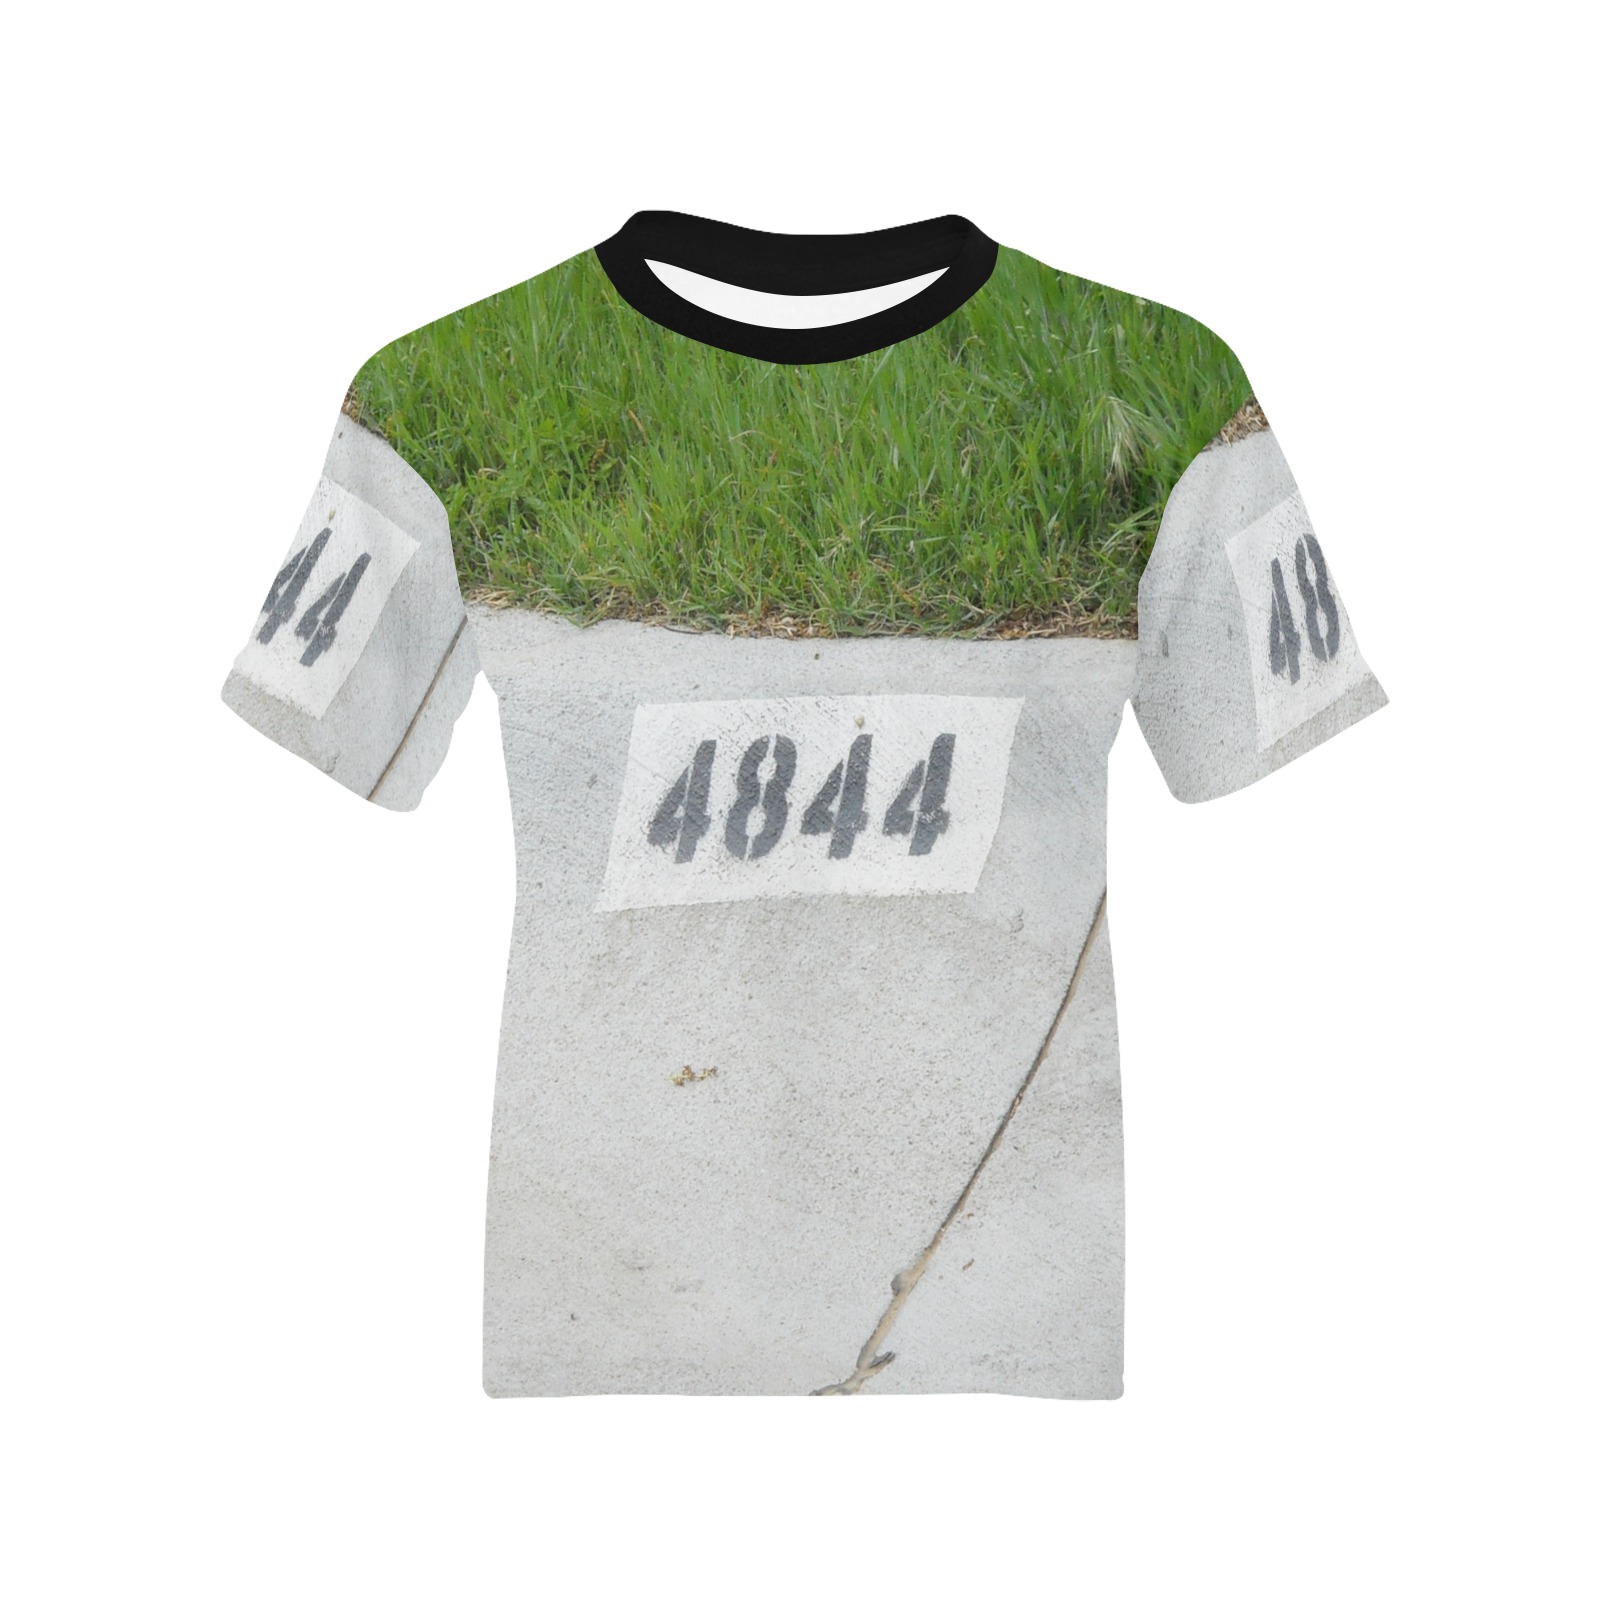 Street Number 4844 with black collar Kids' All Over Print T-shirt (Model T65)